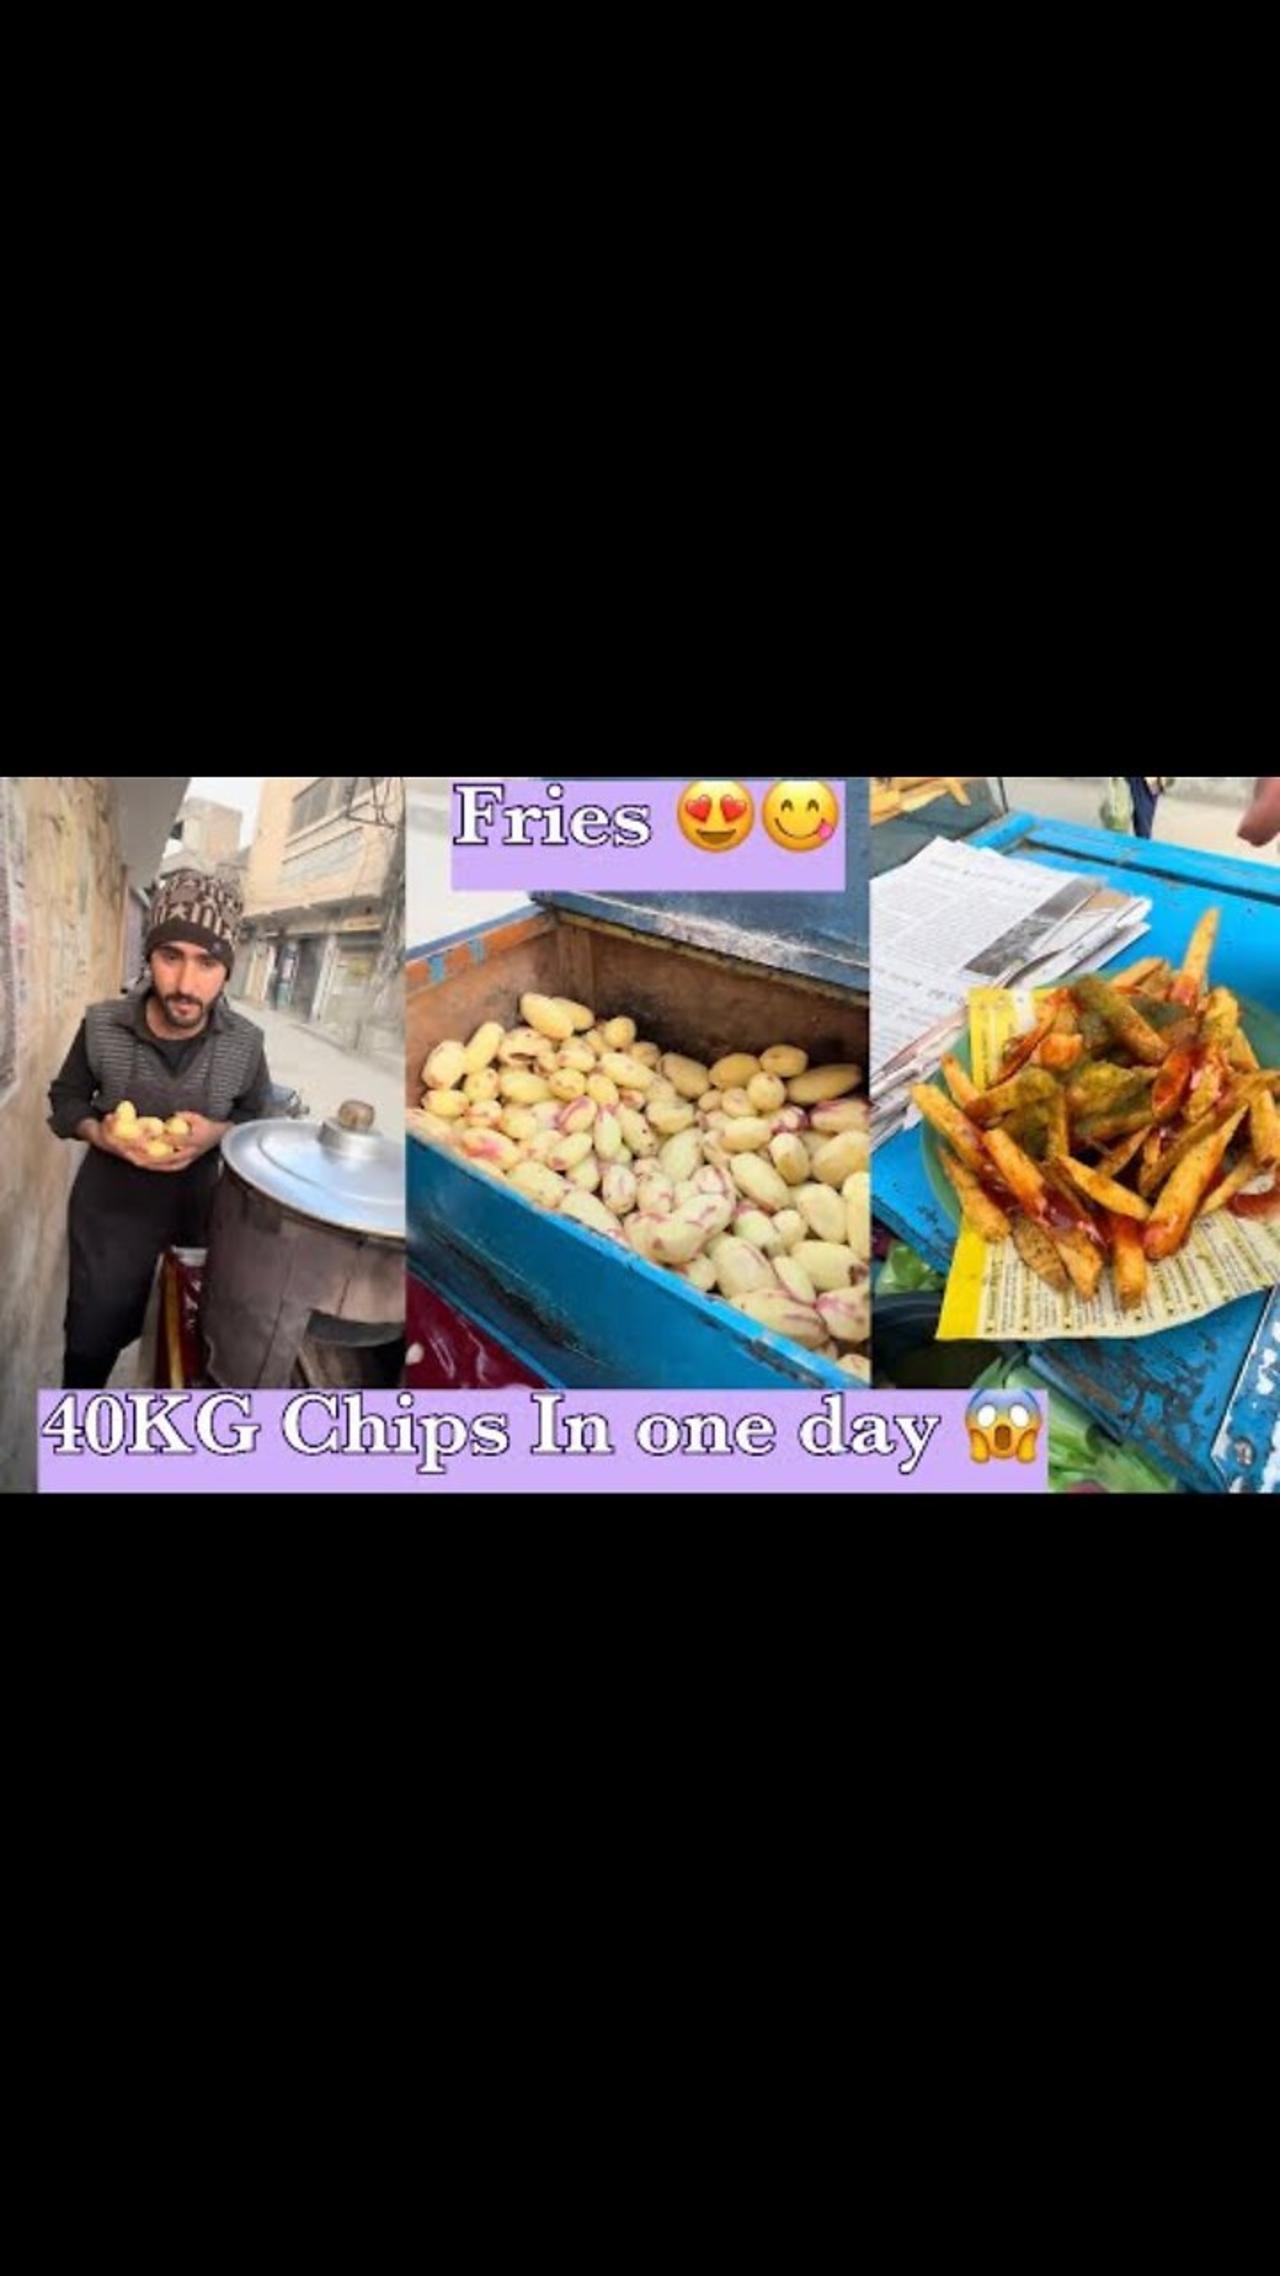 Hardworking man selling 40KG fries in one day 😱 || French fries || local market ||